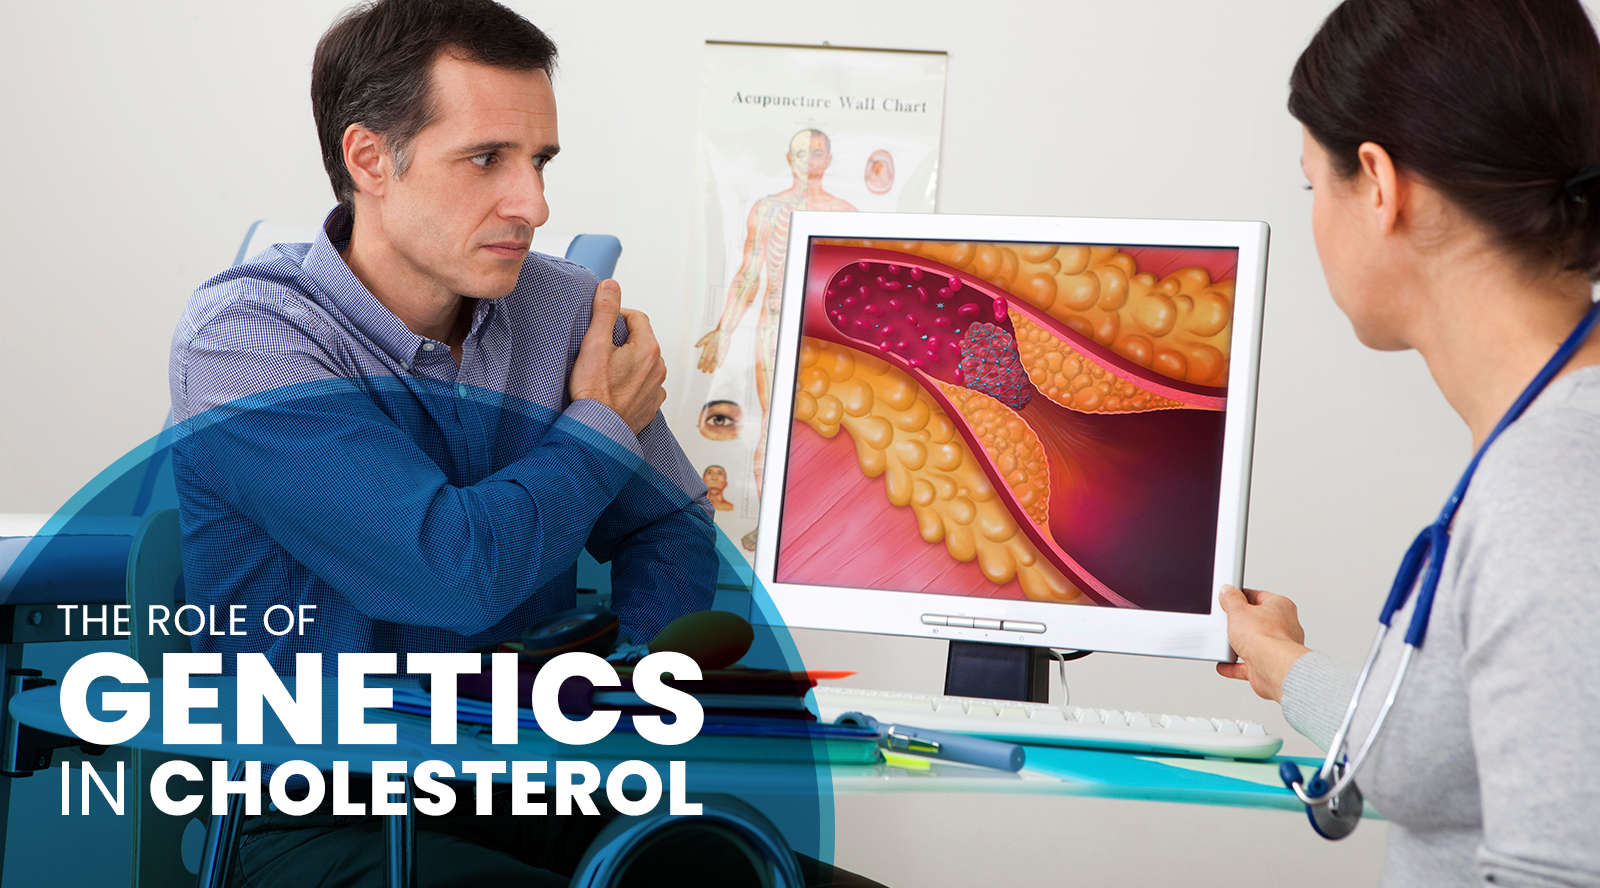 The Role of Genetics in Cholesterol: What You Need to Know